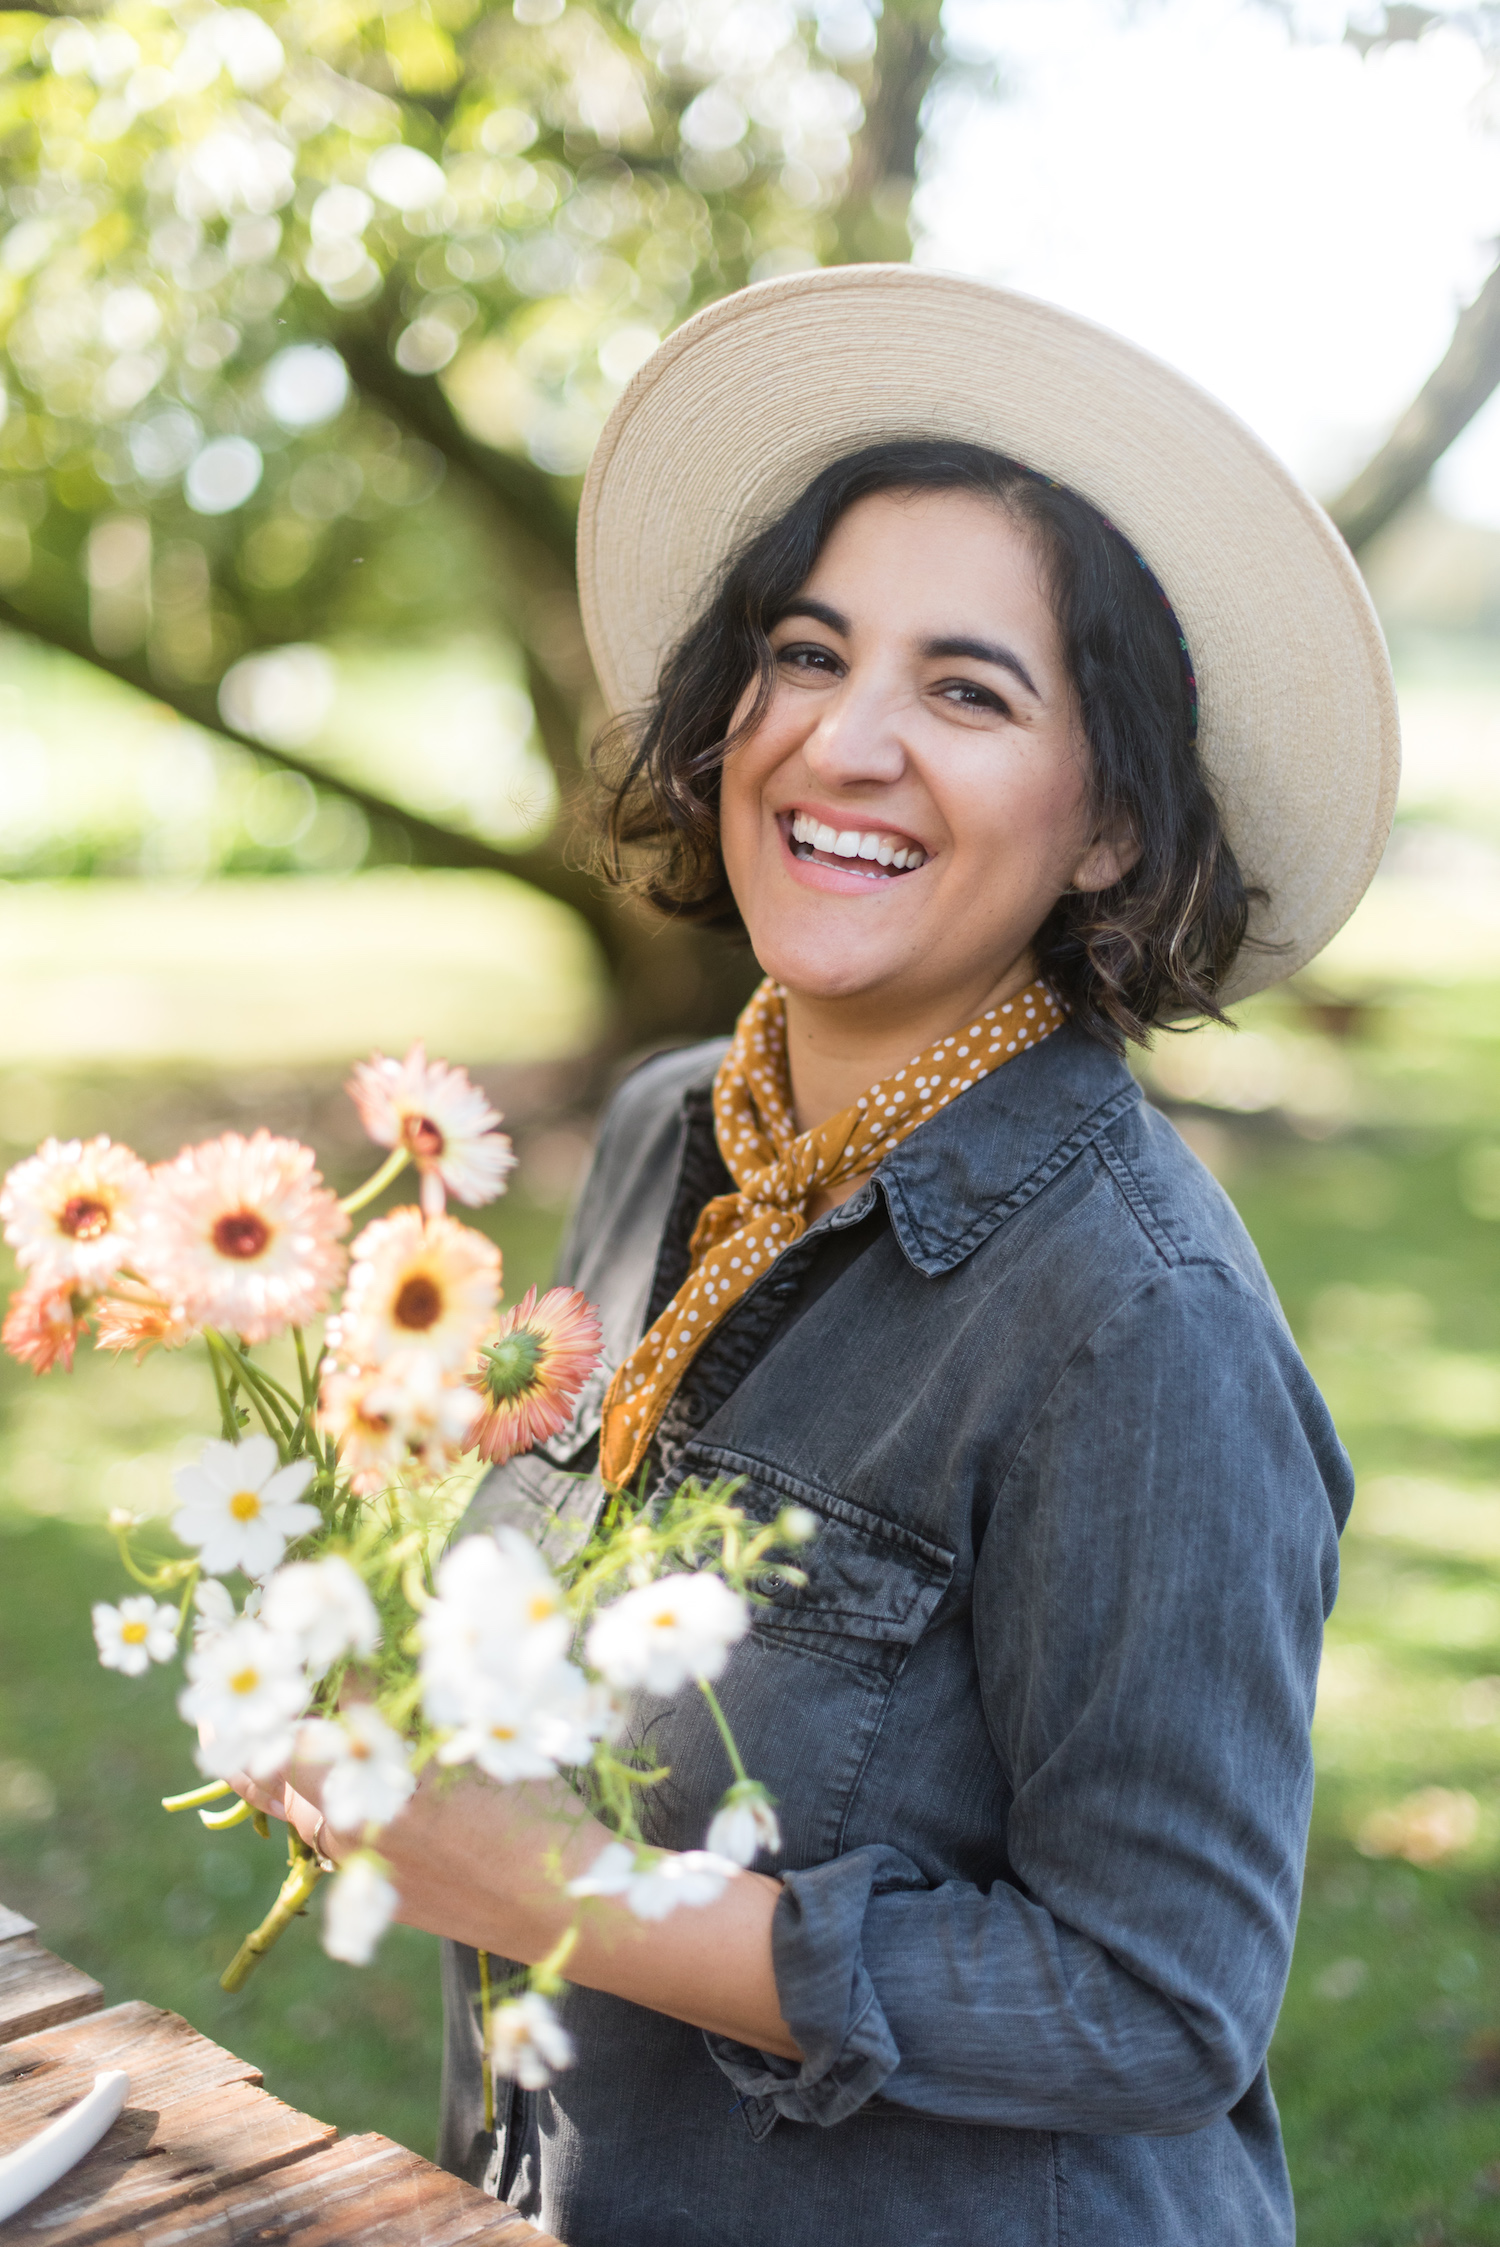 Amy Balsters smiles as she holds a bouquet of field flowers to reference how to find floral color palette inspiration beyond the color wheel.